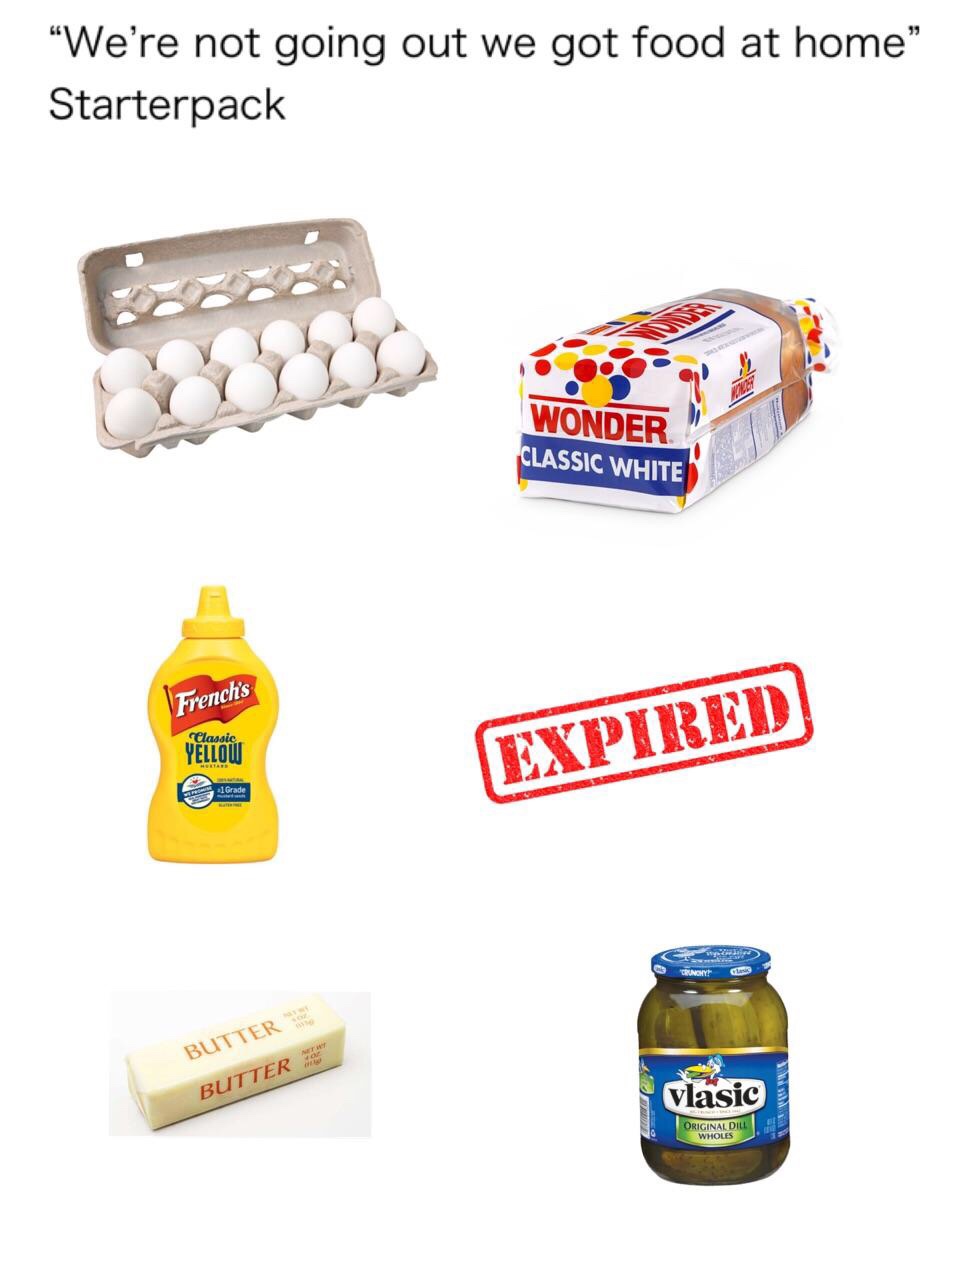 food starter pack - "We're not going out we got food at home Starterpack Wonder Classic White French's Classic Yellow Expired Canon Butter Butter Vlasic Original Dill Wholes